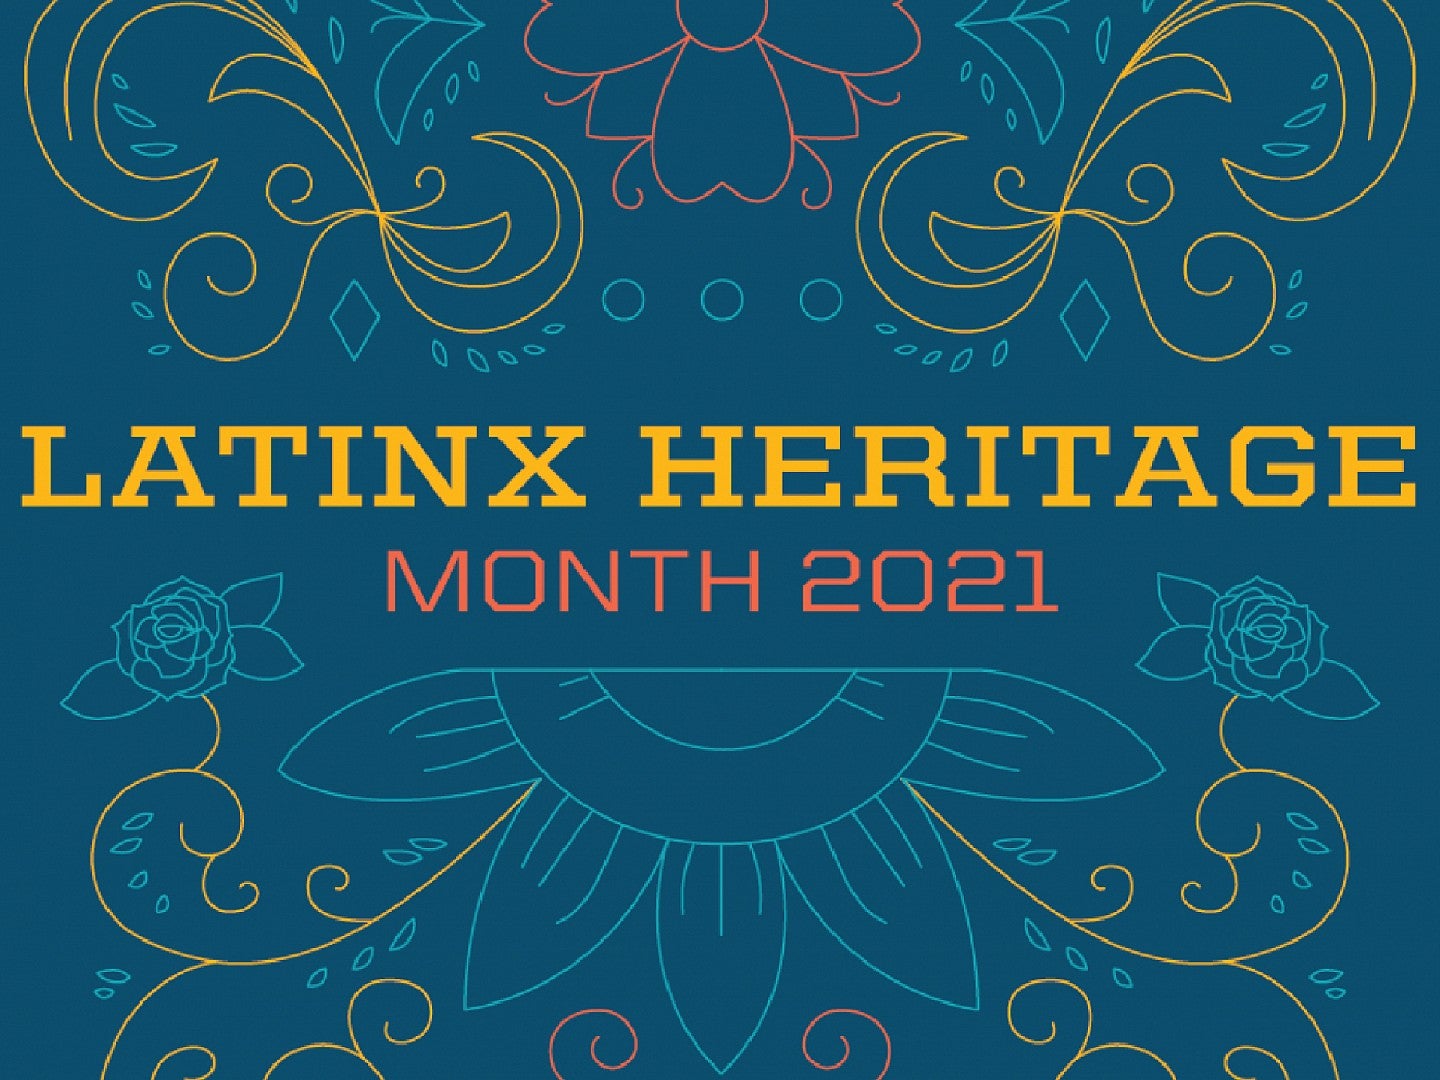 latinx heritage month 2021 written in yellow and red font on top of a blue background with a yellow, blue and red pattern